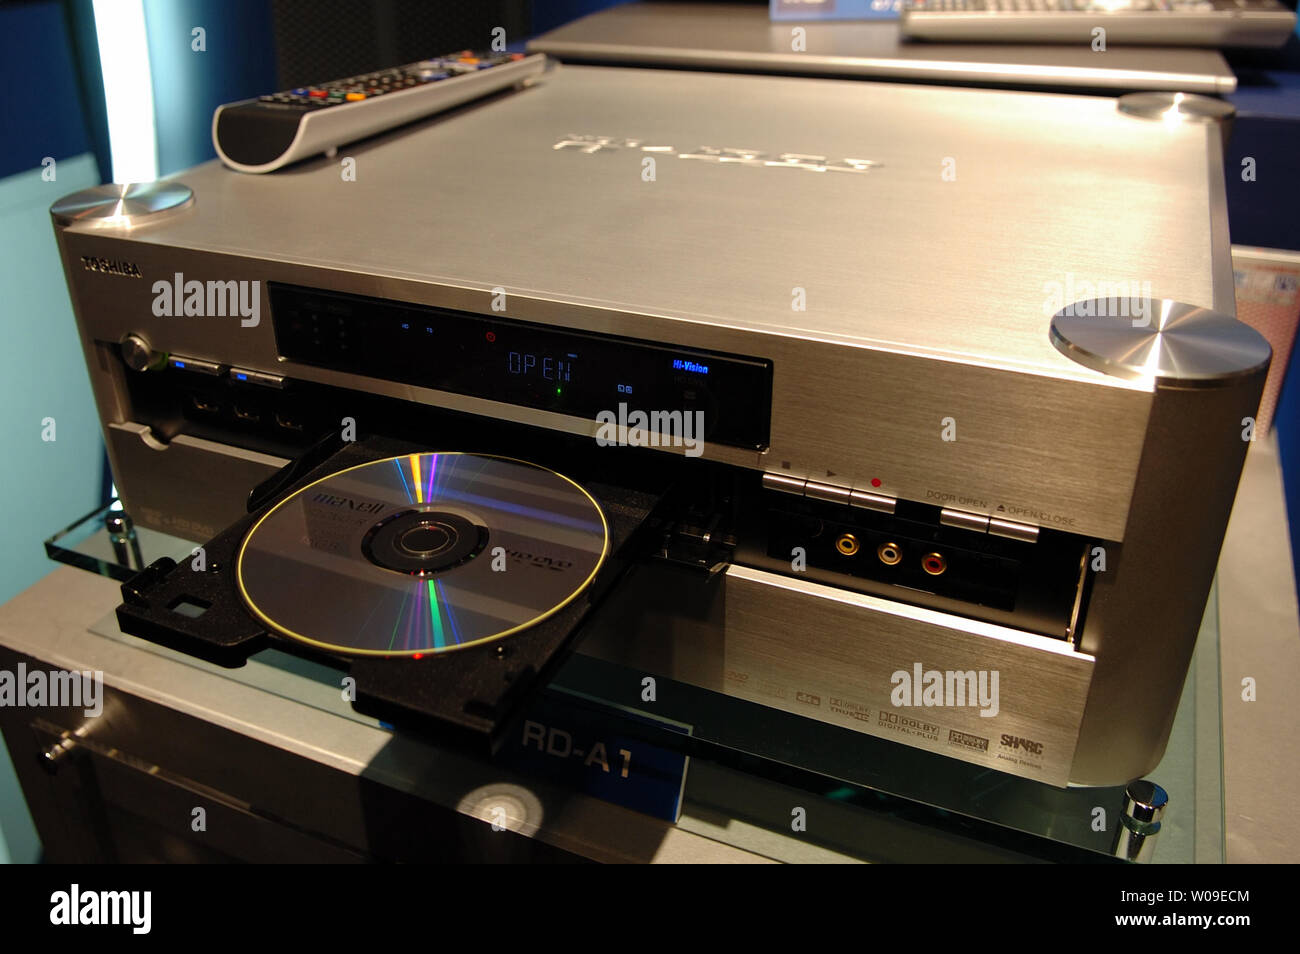 Toshiba Corporation announced the world's first digital hard disk video  recorder, integrating a recordable HD DVD and 1-terabyte hard disk RD-A1  during the press conference in Tokyo, Japan, on June 22, 2006.